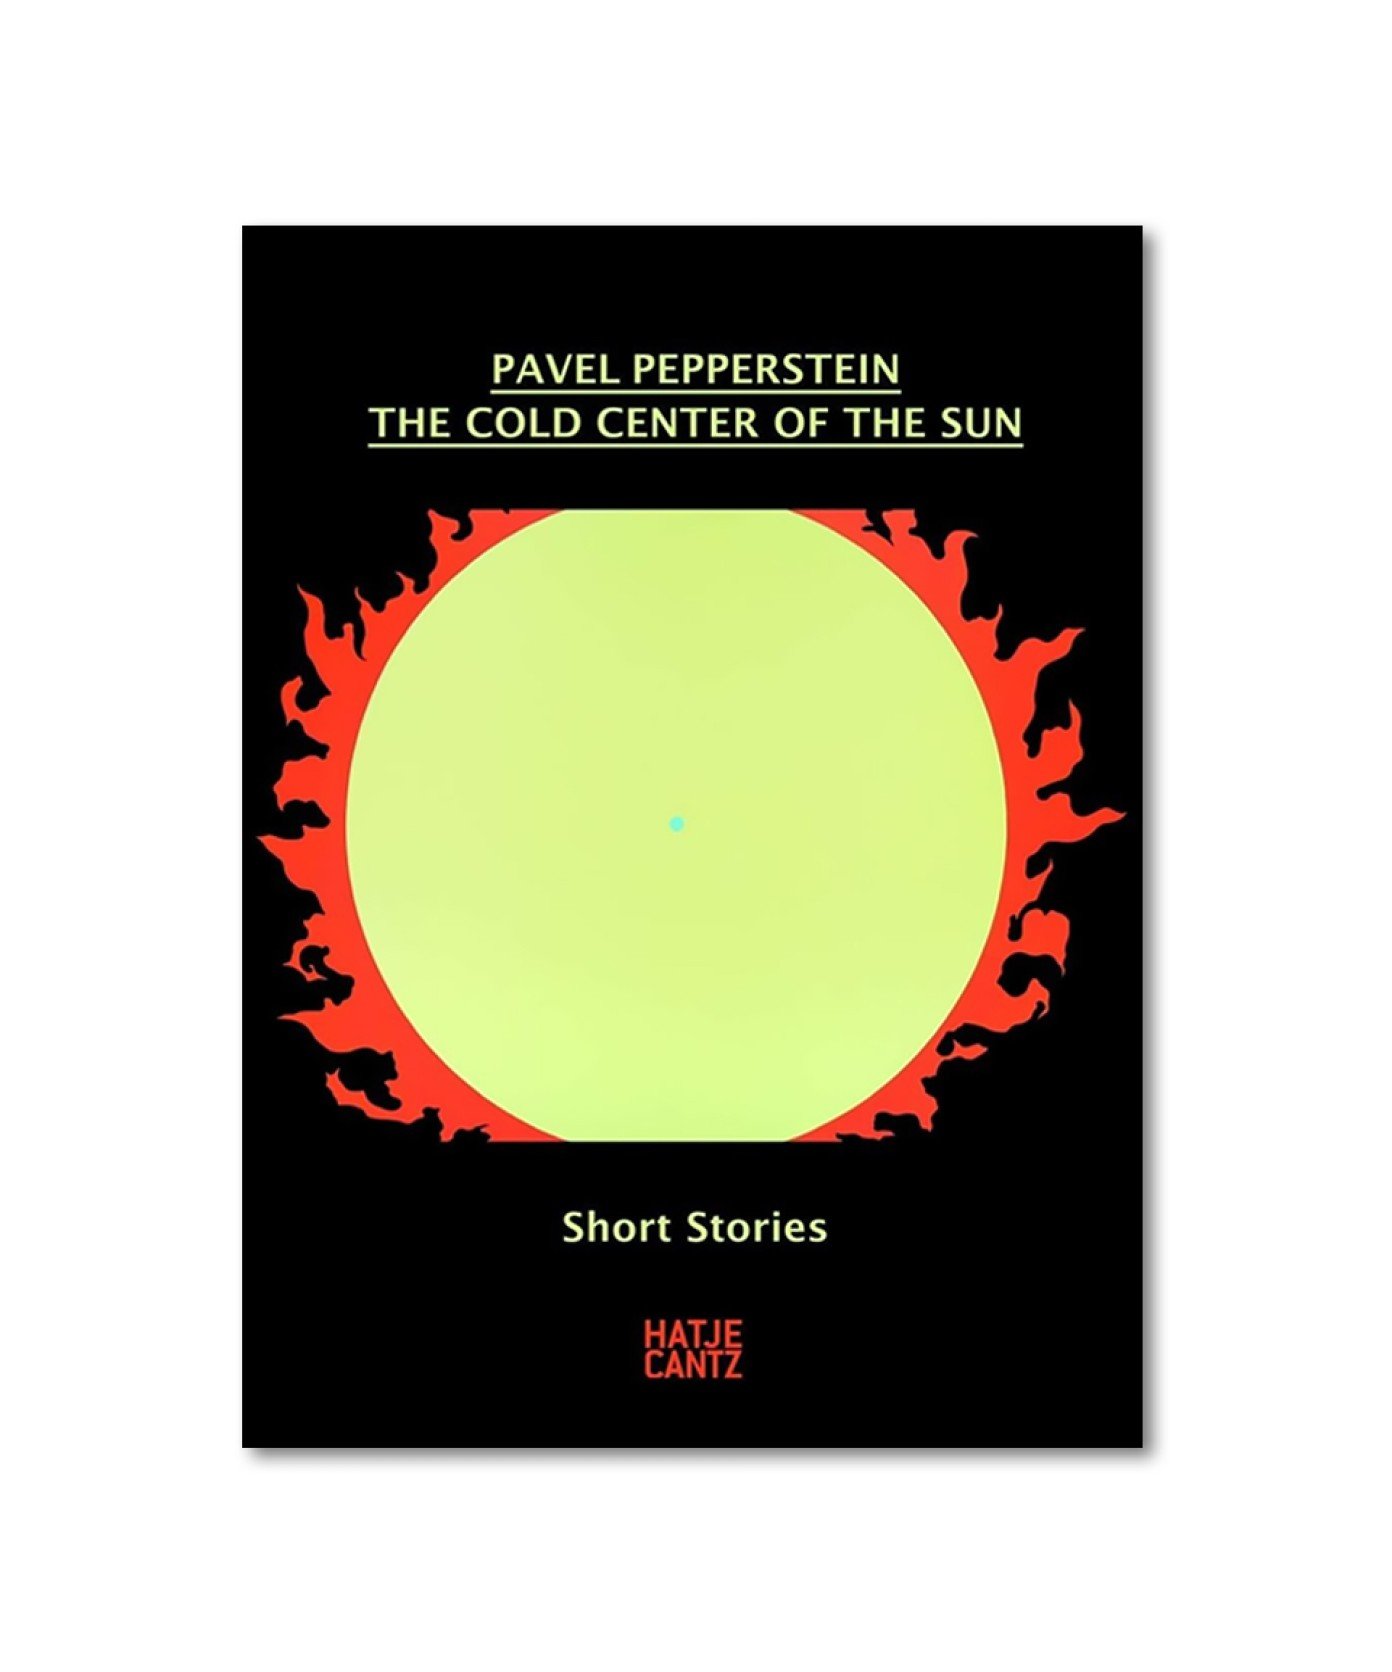 Pavel Pepperstein: The Cold Center of the. Sun Short Stories